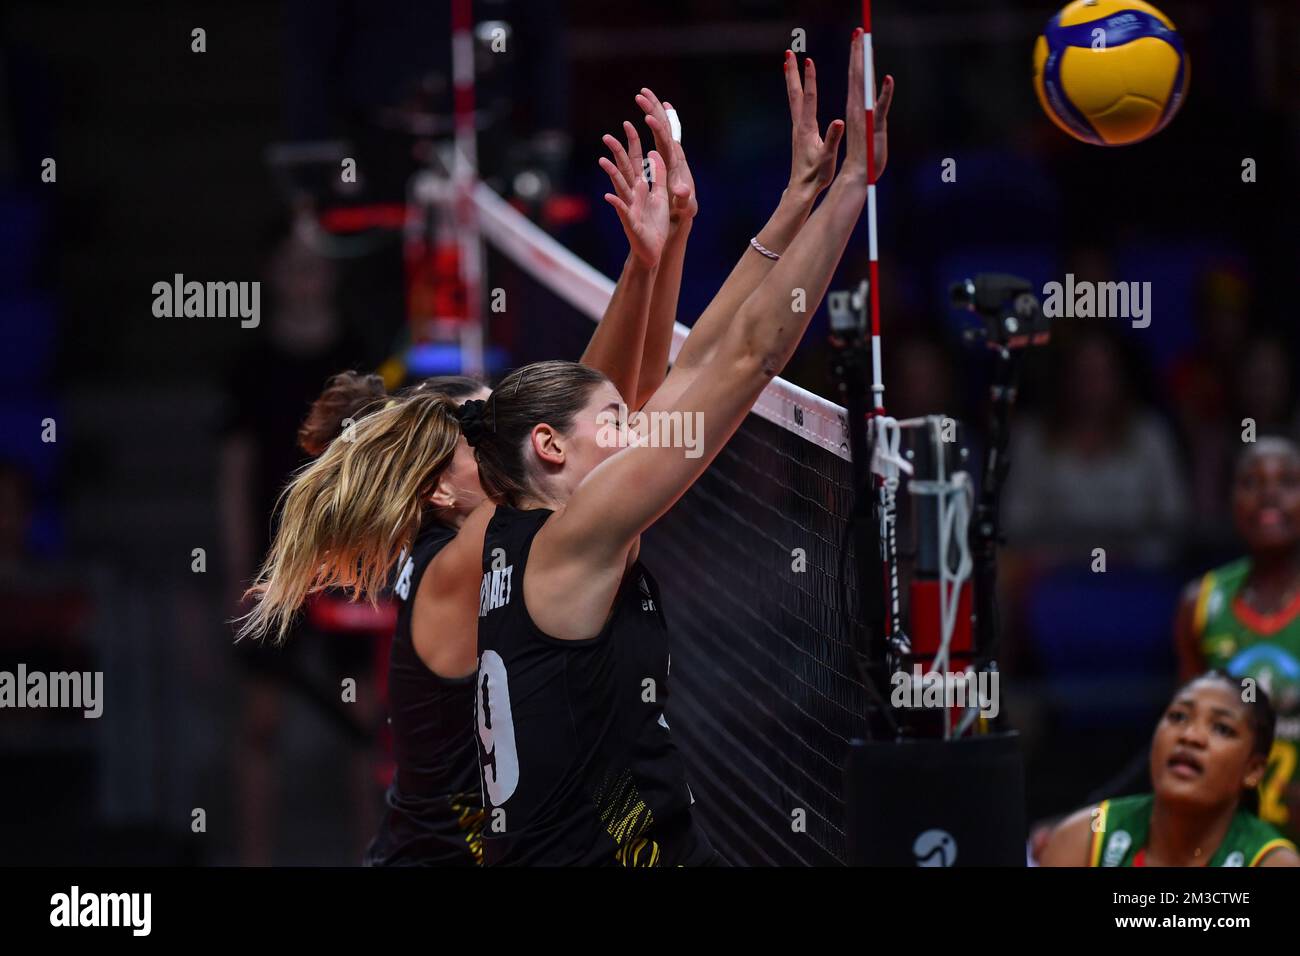 Belgium's Silke Van Avermaet pictured in action during a volleyball game  between Belgian national women's team the Yellow Tigers and Cameroon  national team, Sunday 02 October 2022 in Arnhem during the pool